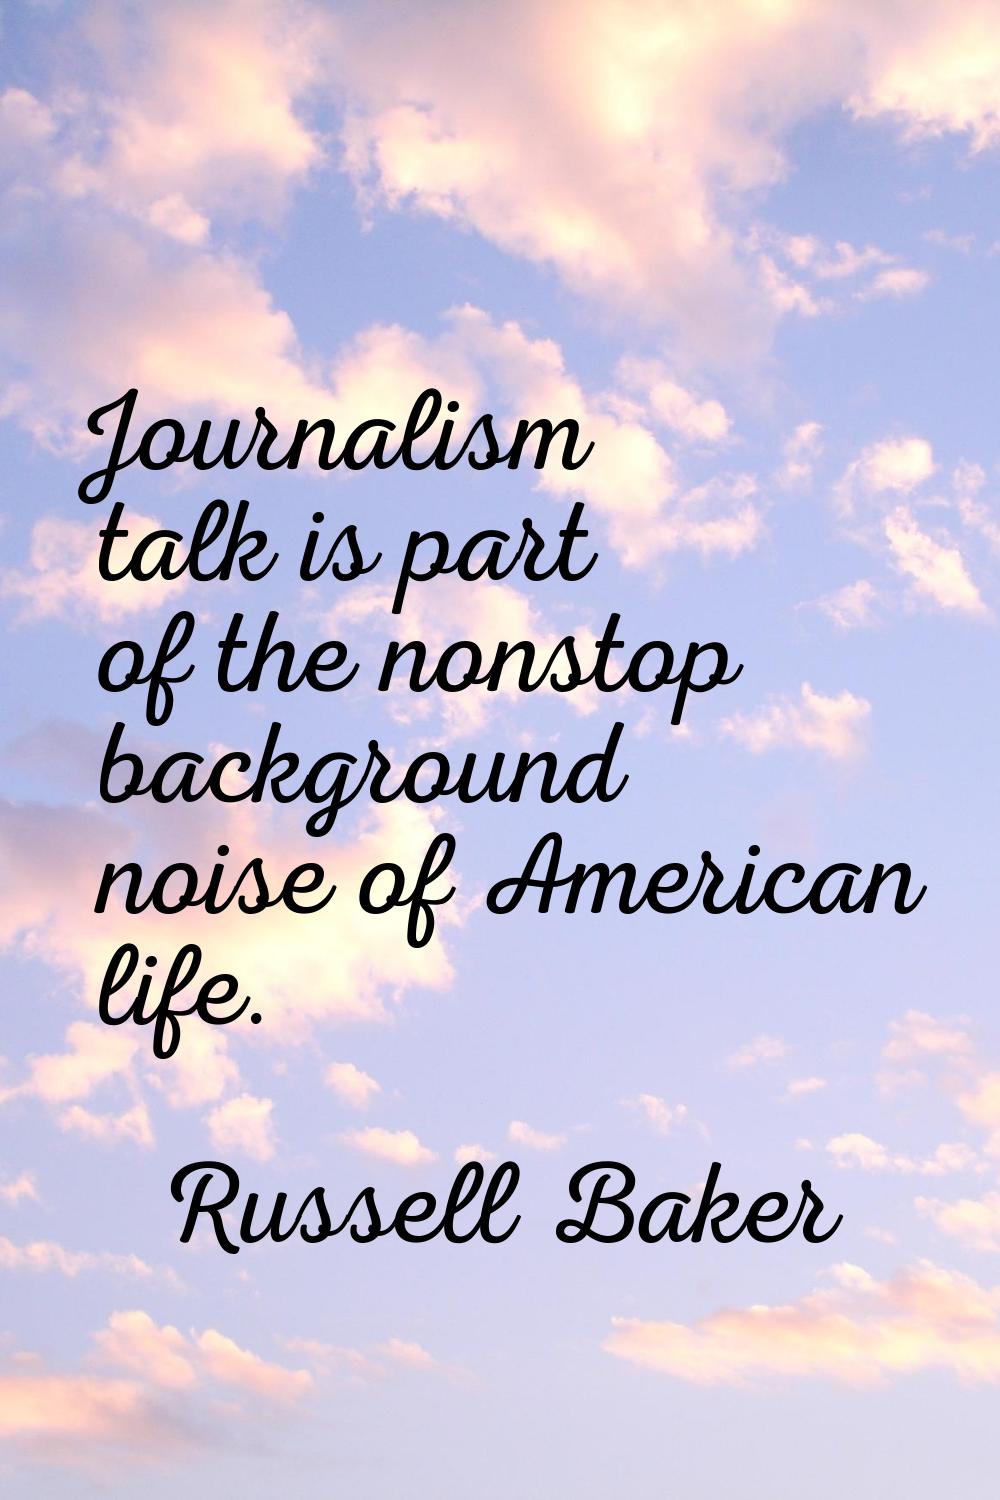 Journalism talk is part of the nonstop background noise of American life.